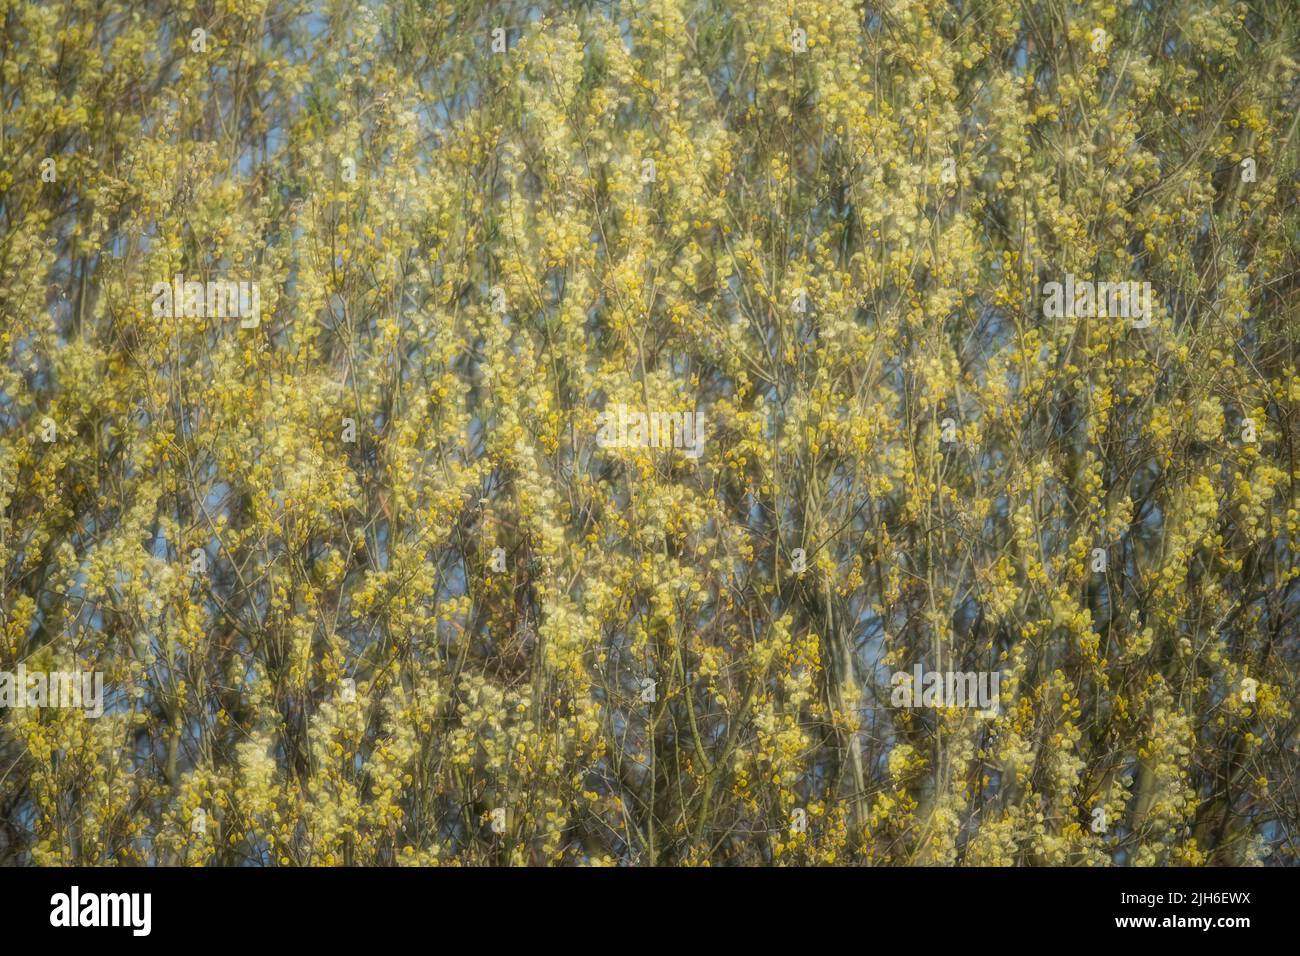 Flowering willow catkins, Oldenburg Muensterland, Huede, Lower Saxony, Germany Stock Photo